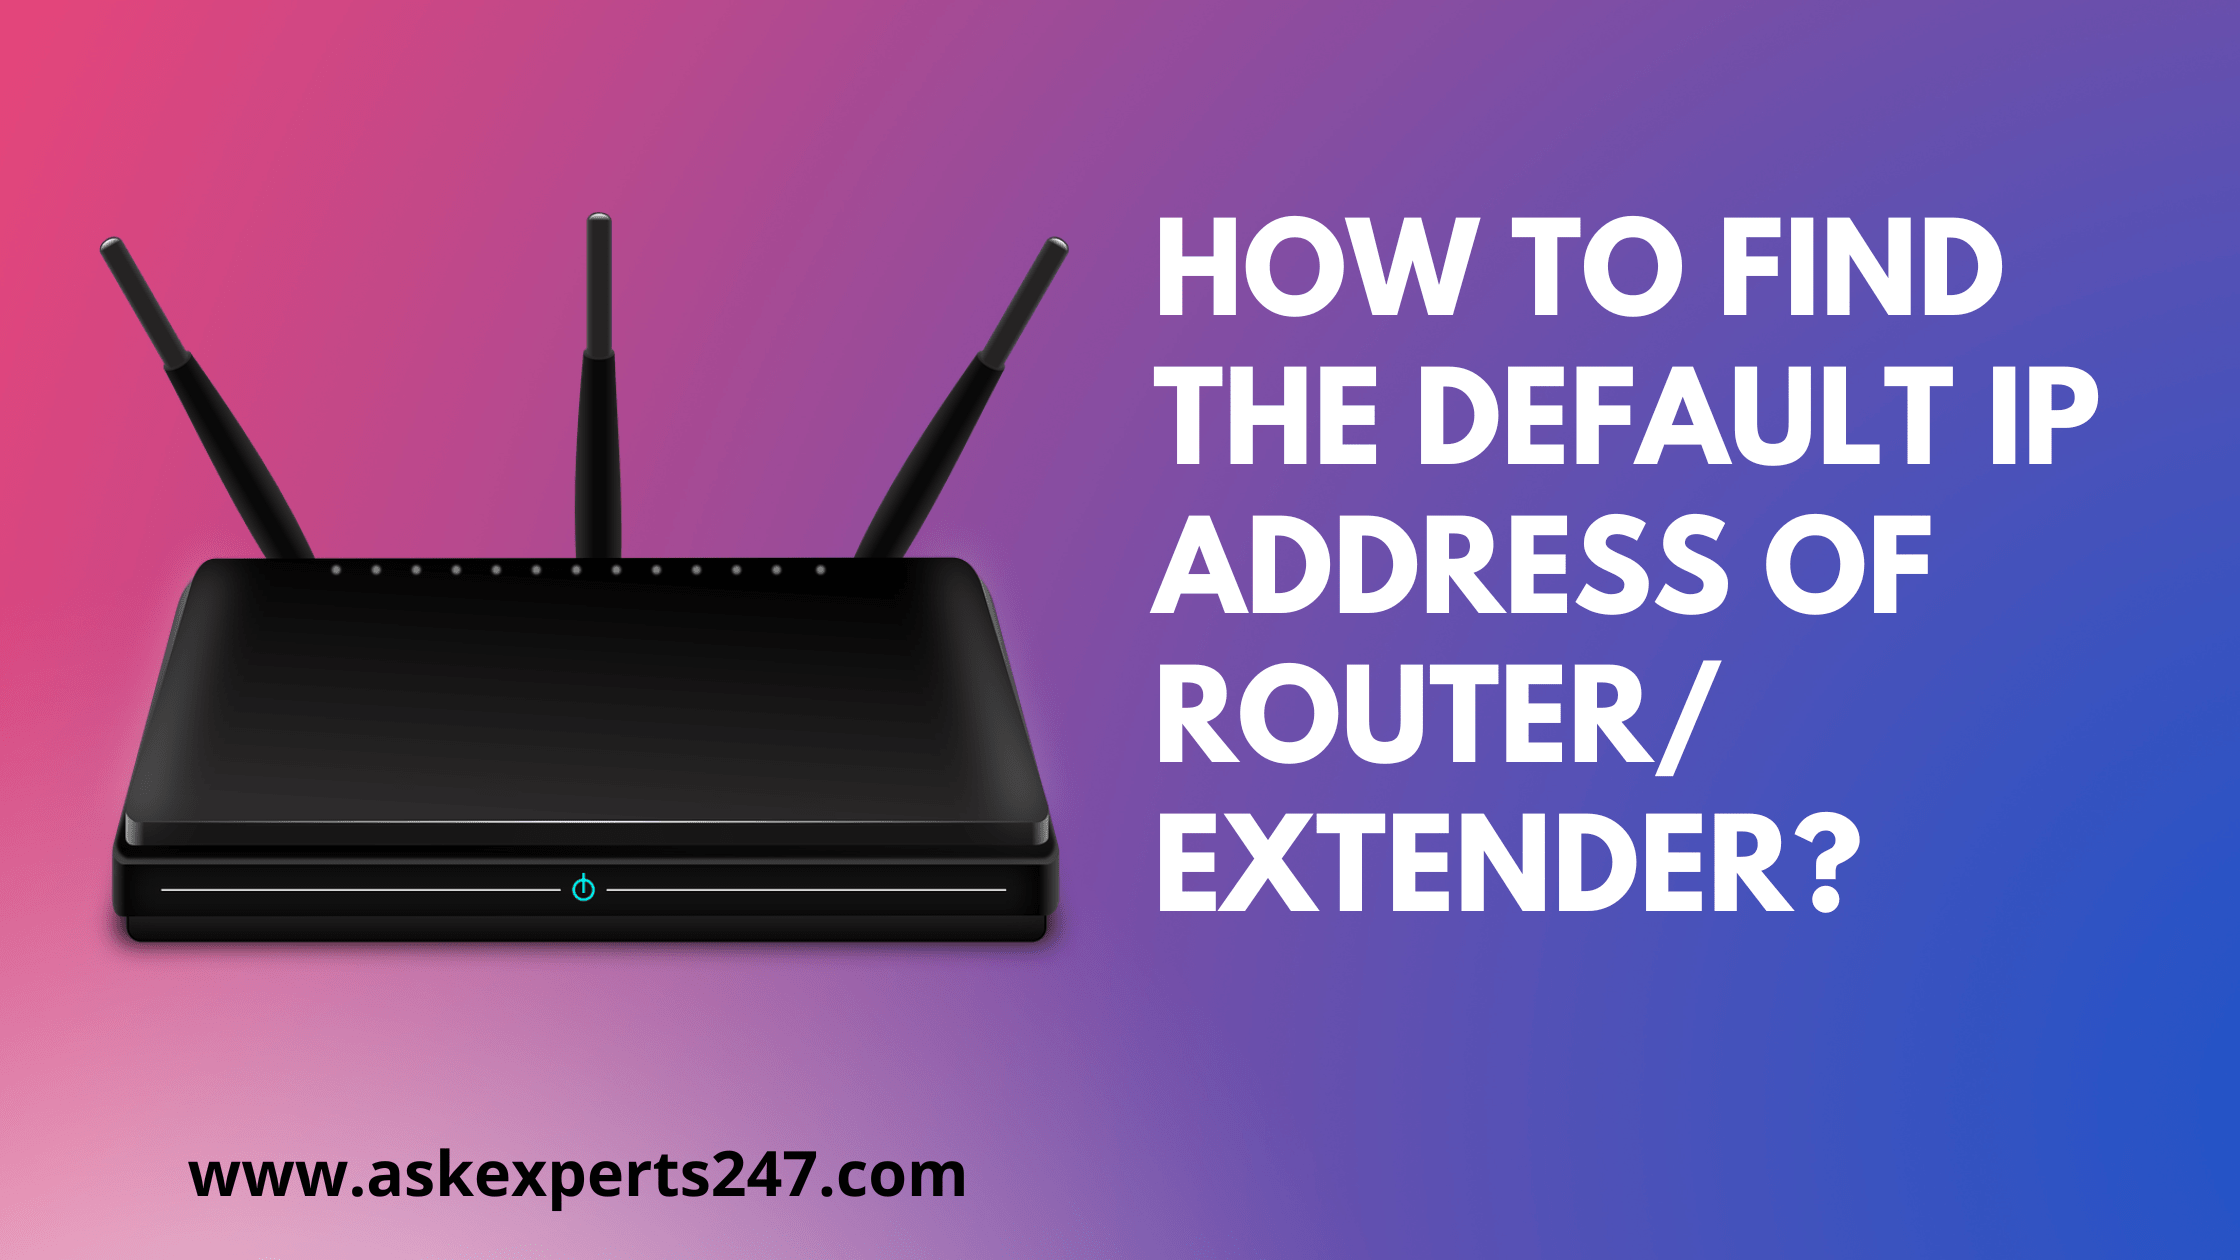 How to find the default IP address of RouterExtender